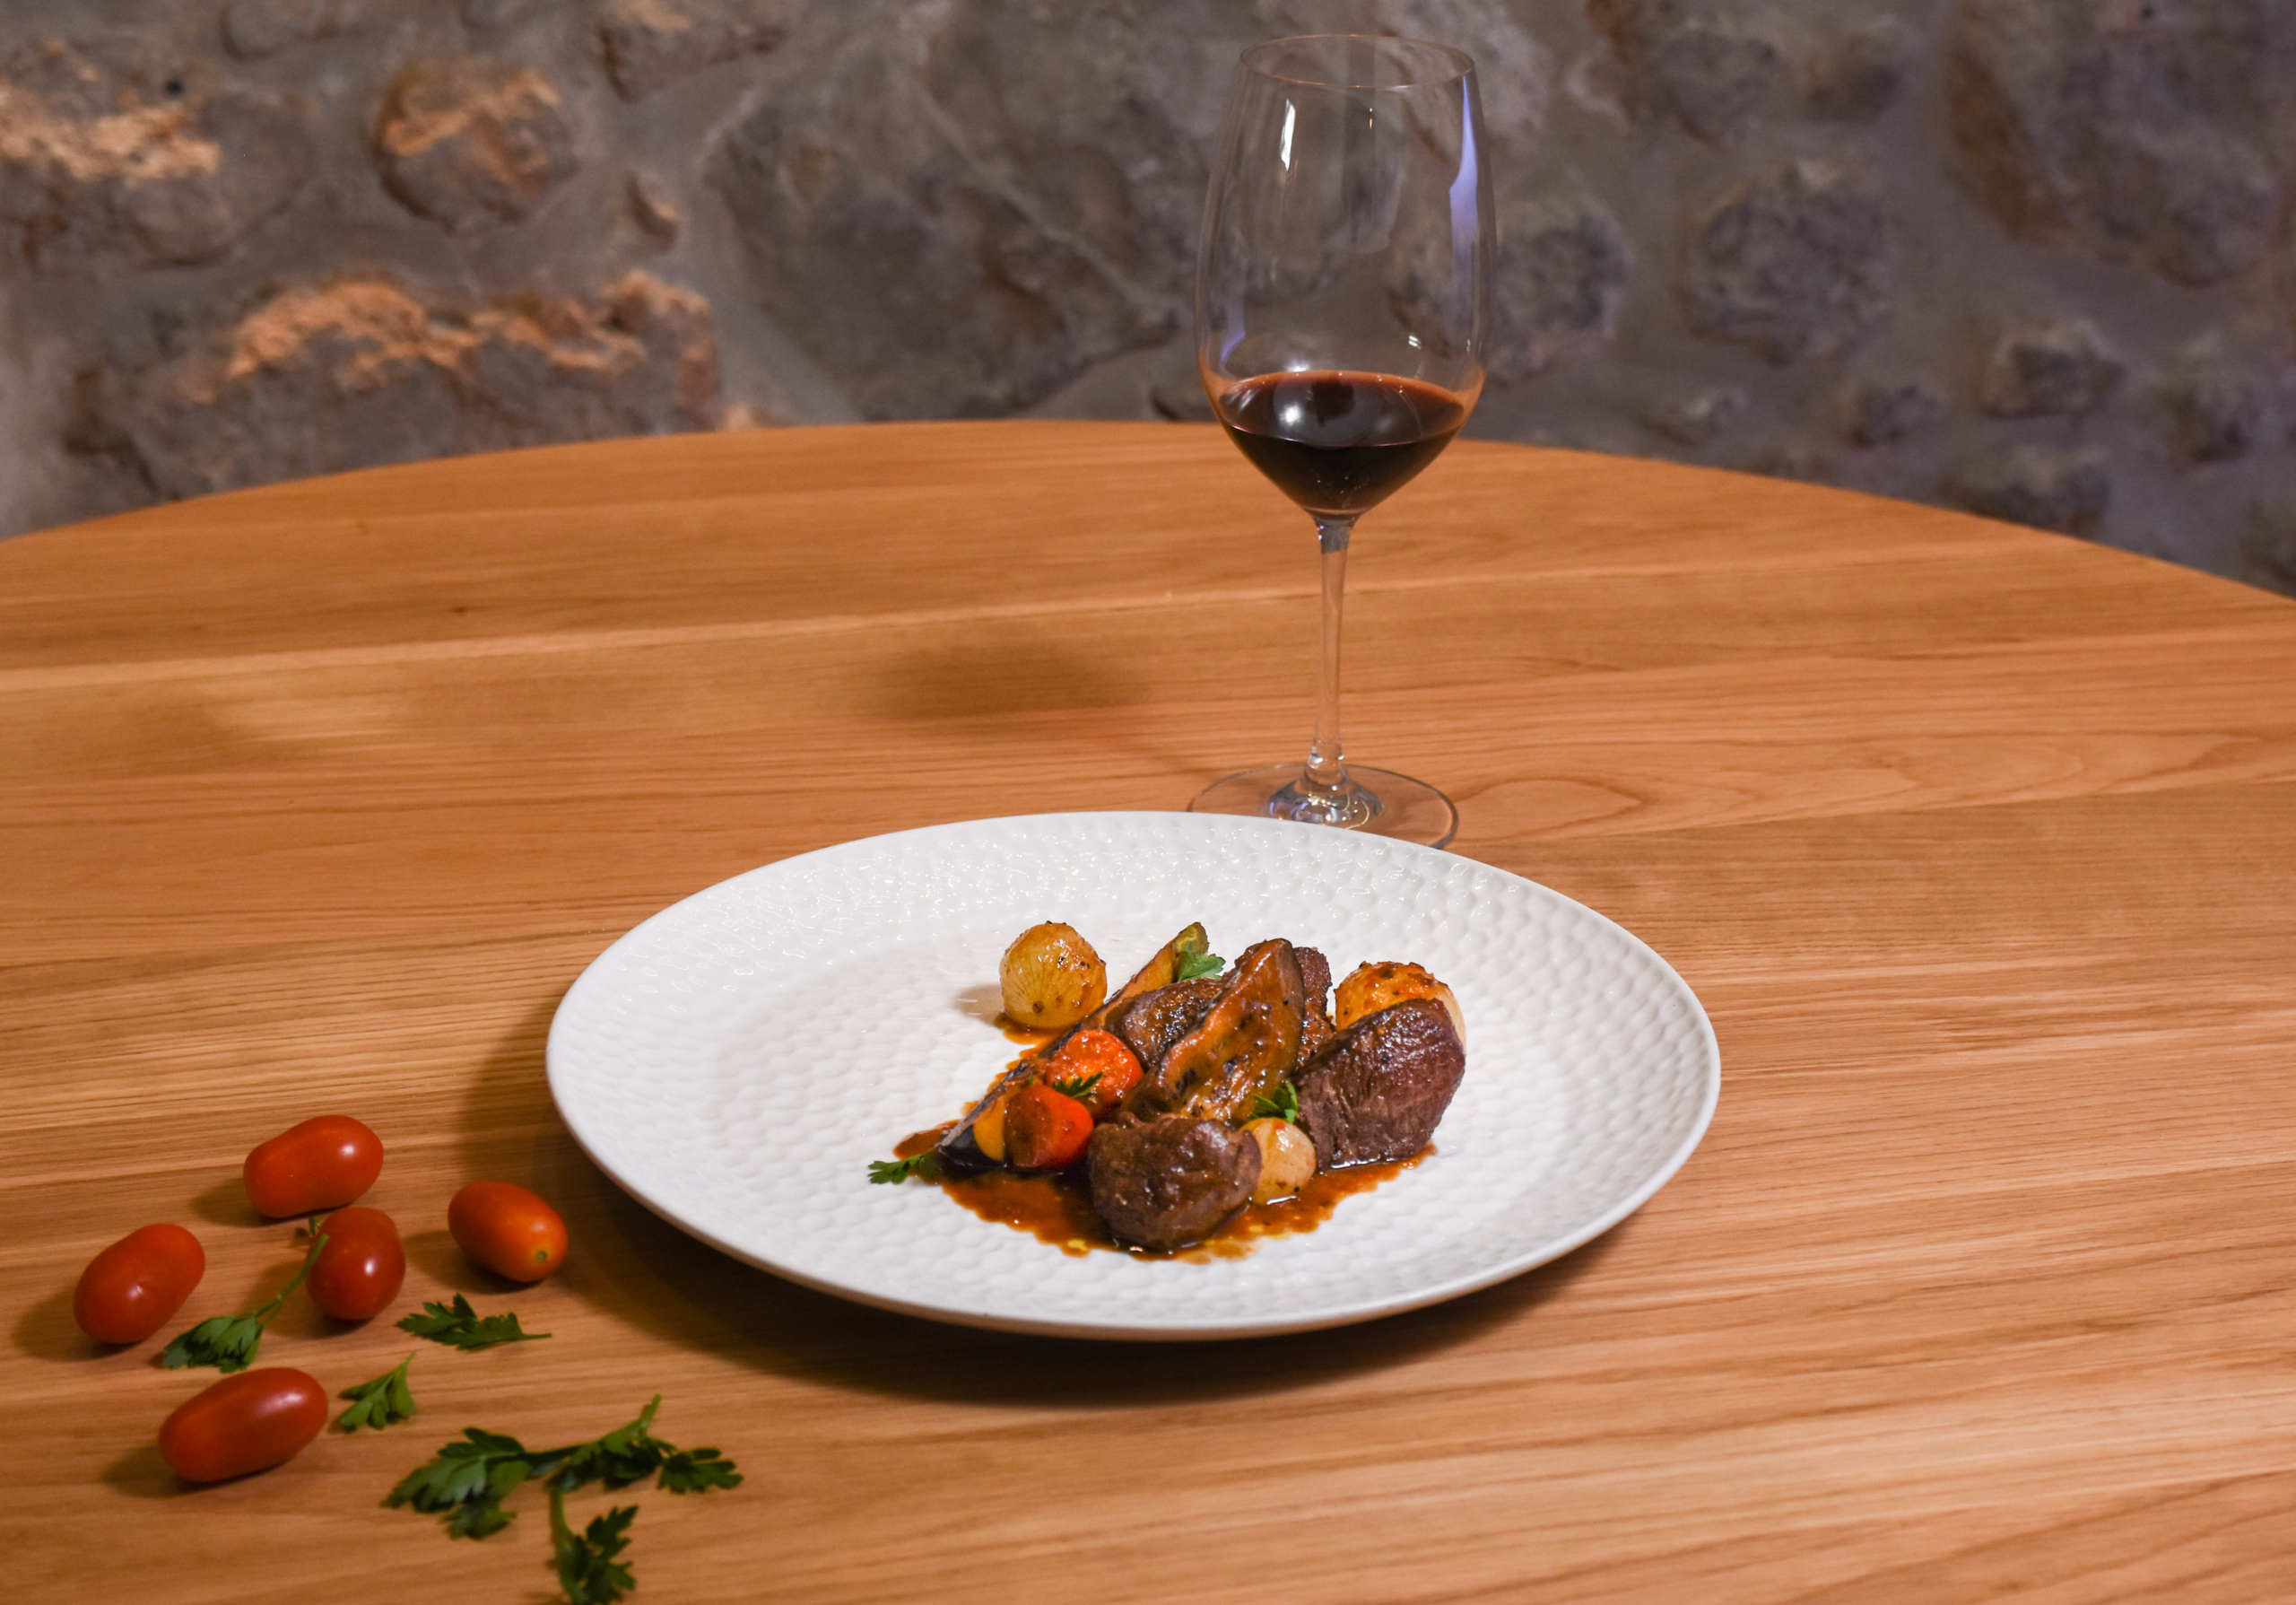 Beef and eggplant braised with tomato sauce with a glass of Mandilari P.G.I. Crete